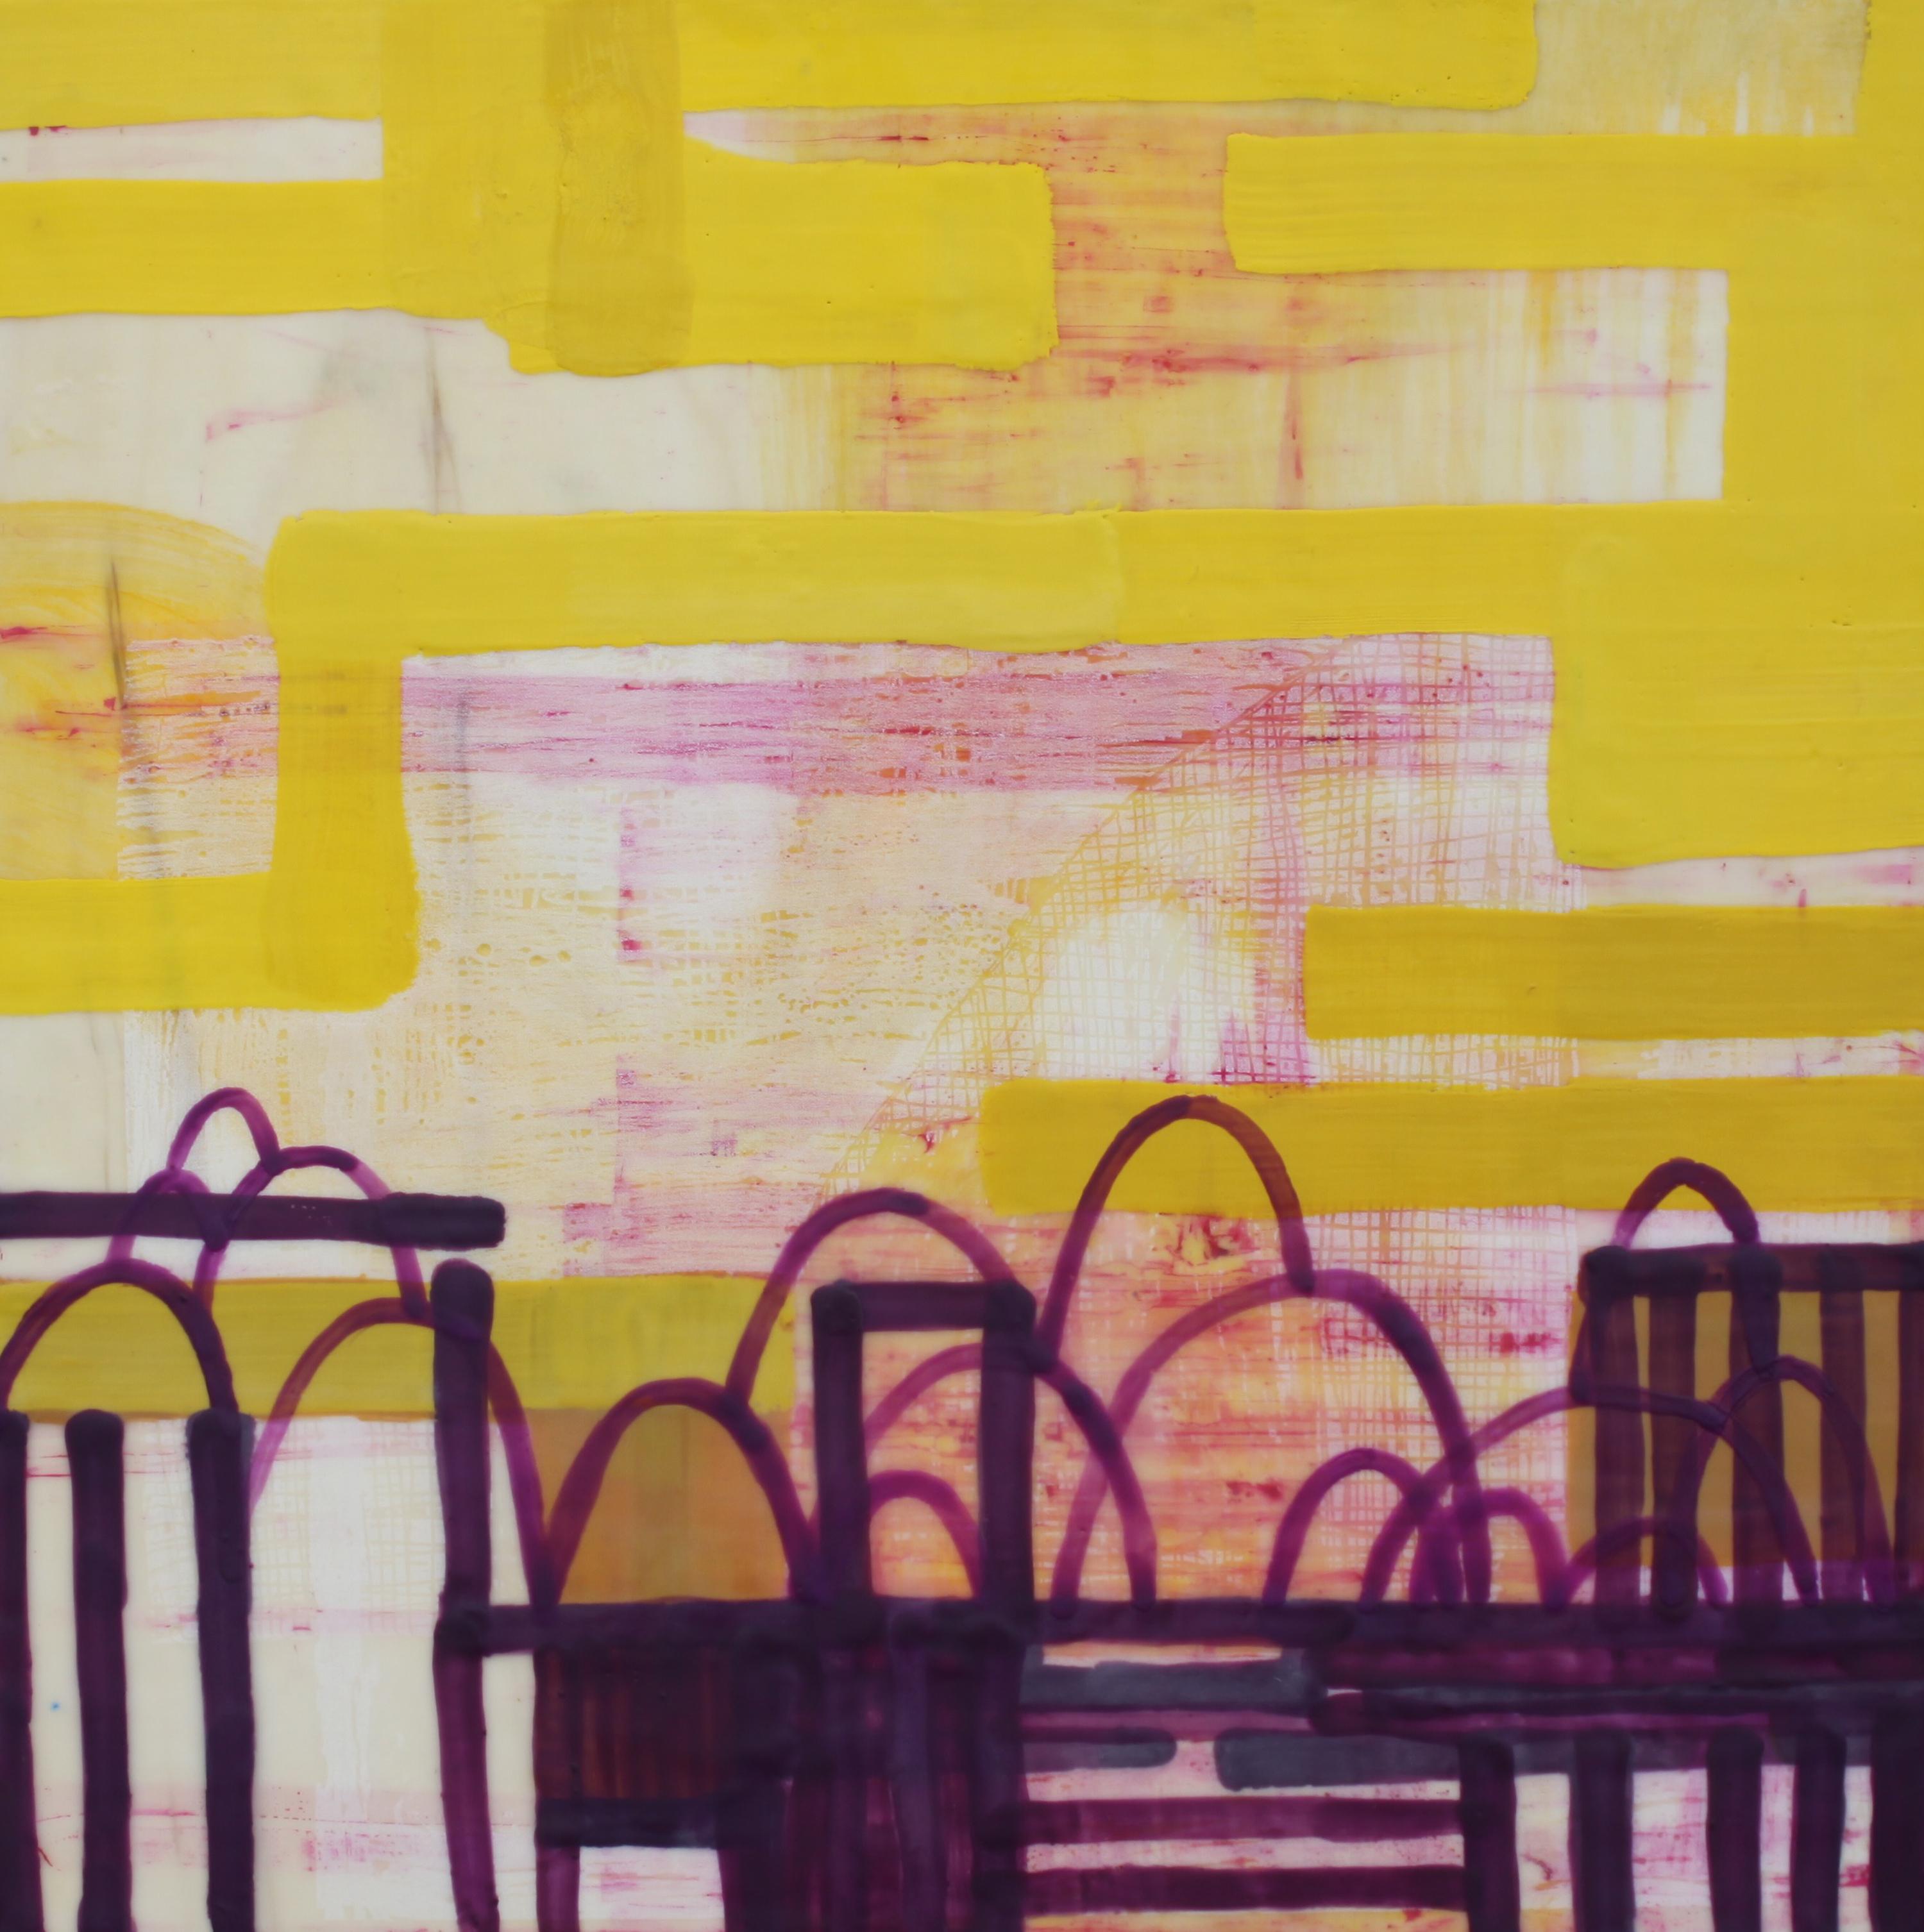 Coming to a Rest, yellow, pink and purple abstract encaustic painting on panel